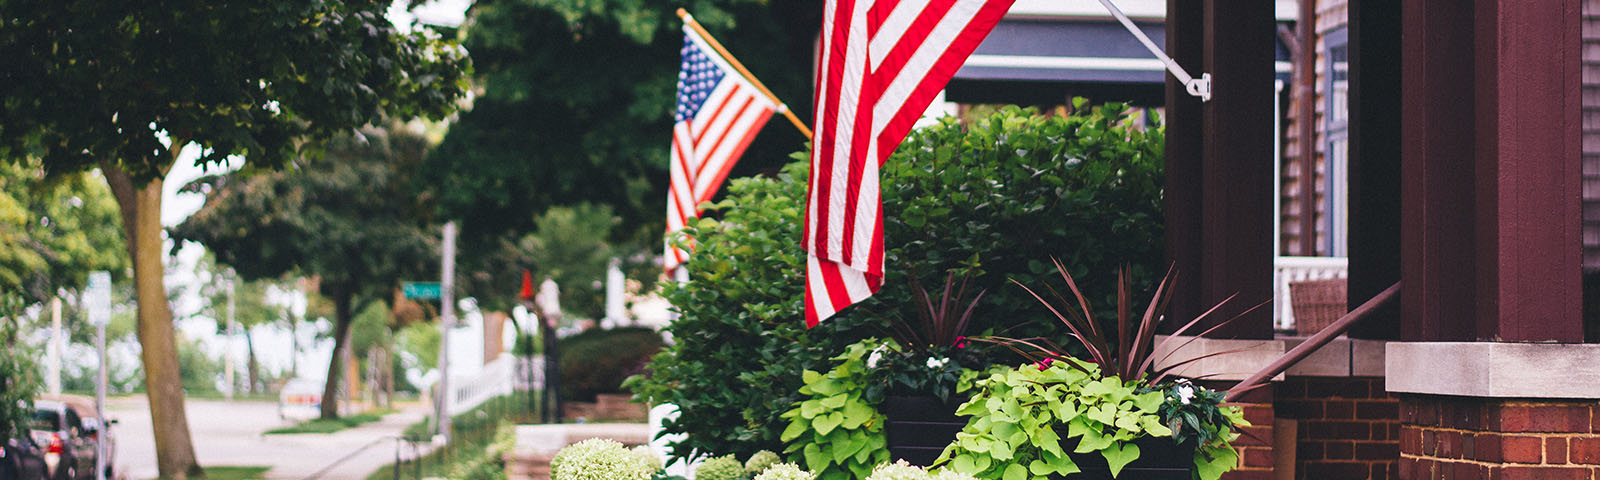 American flags hanging off front porches along a sidewalk